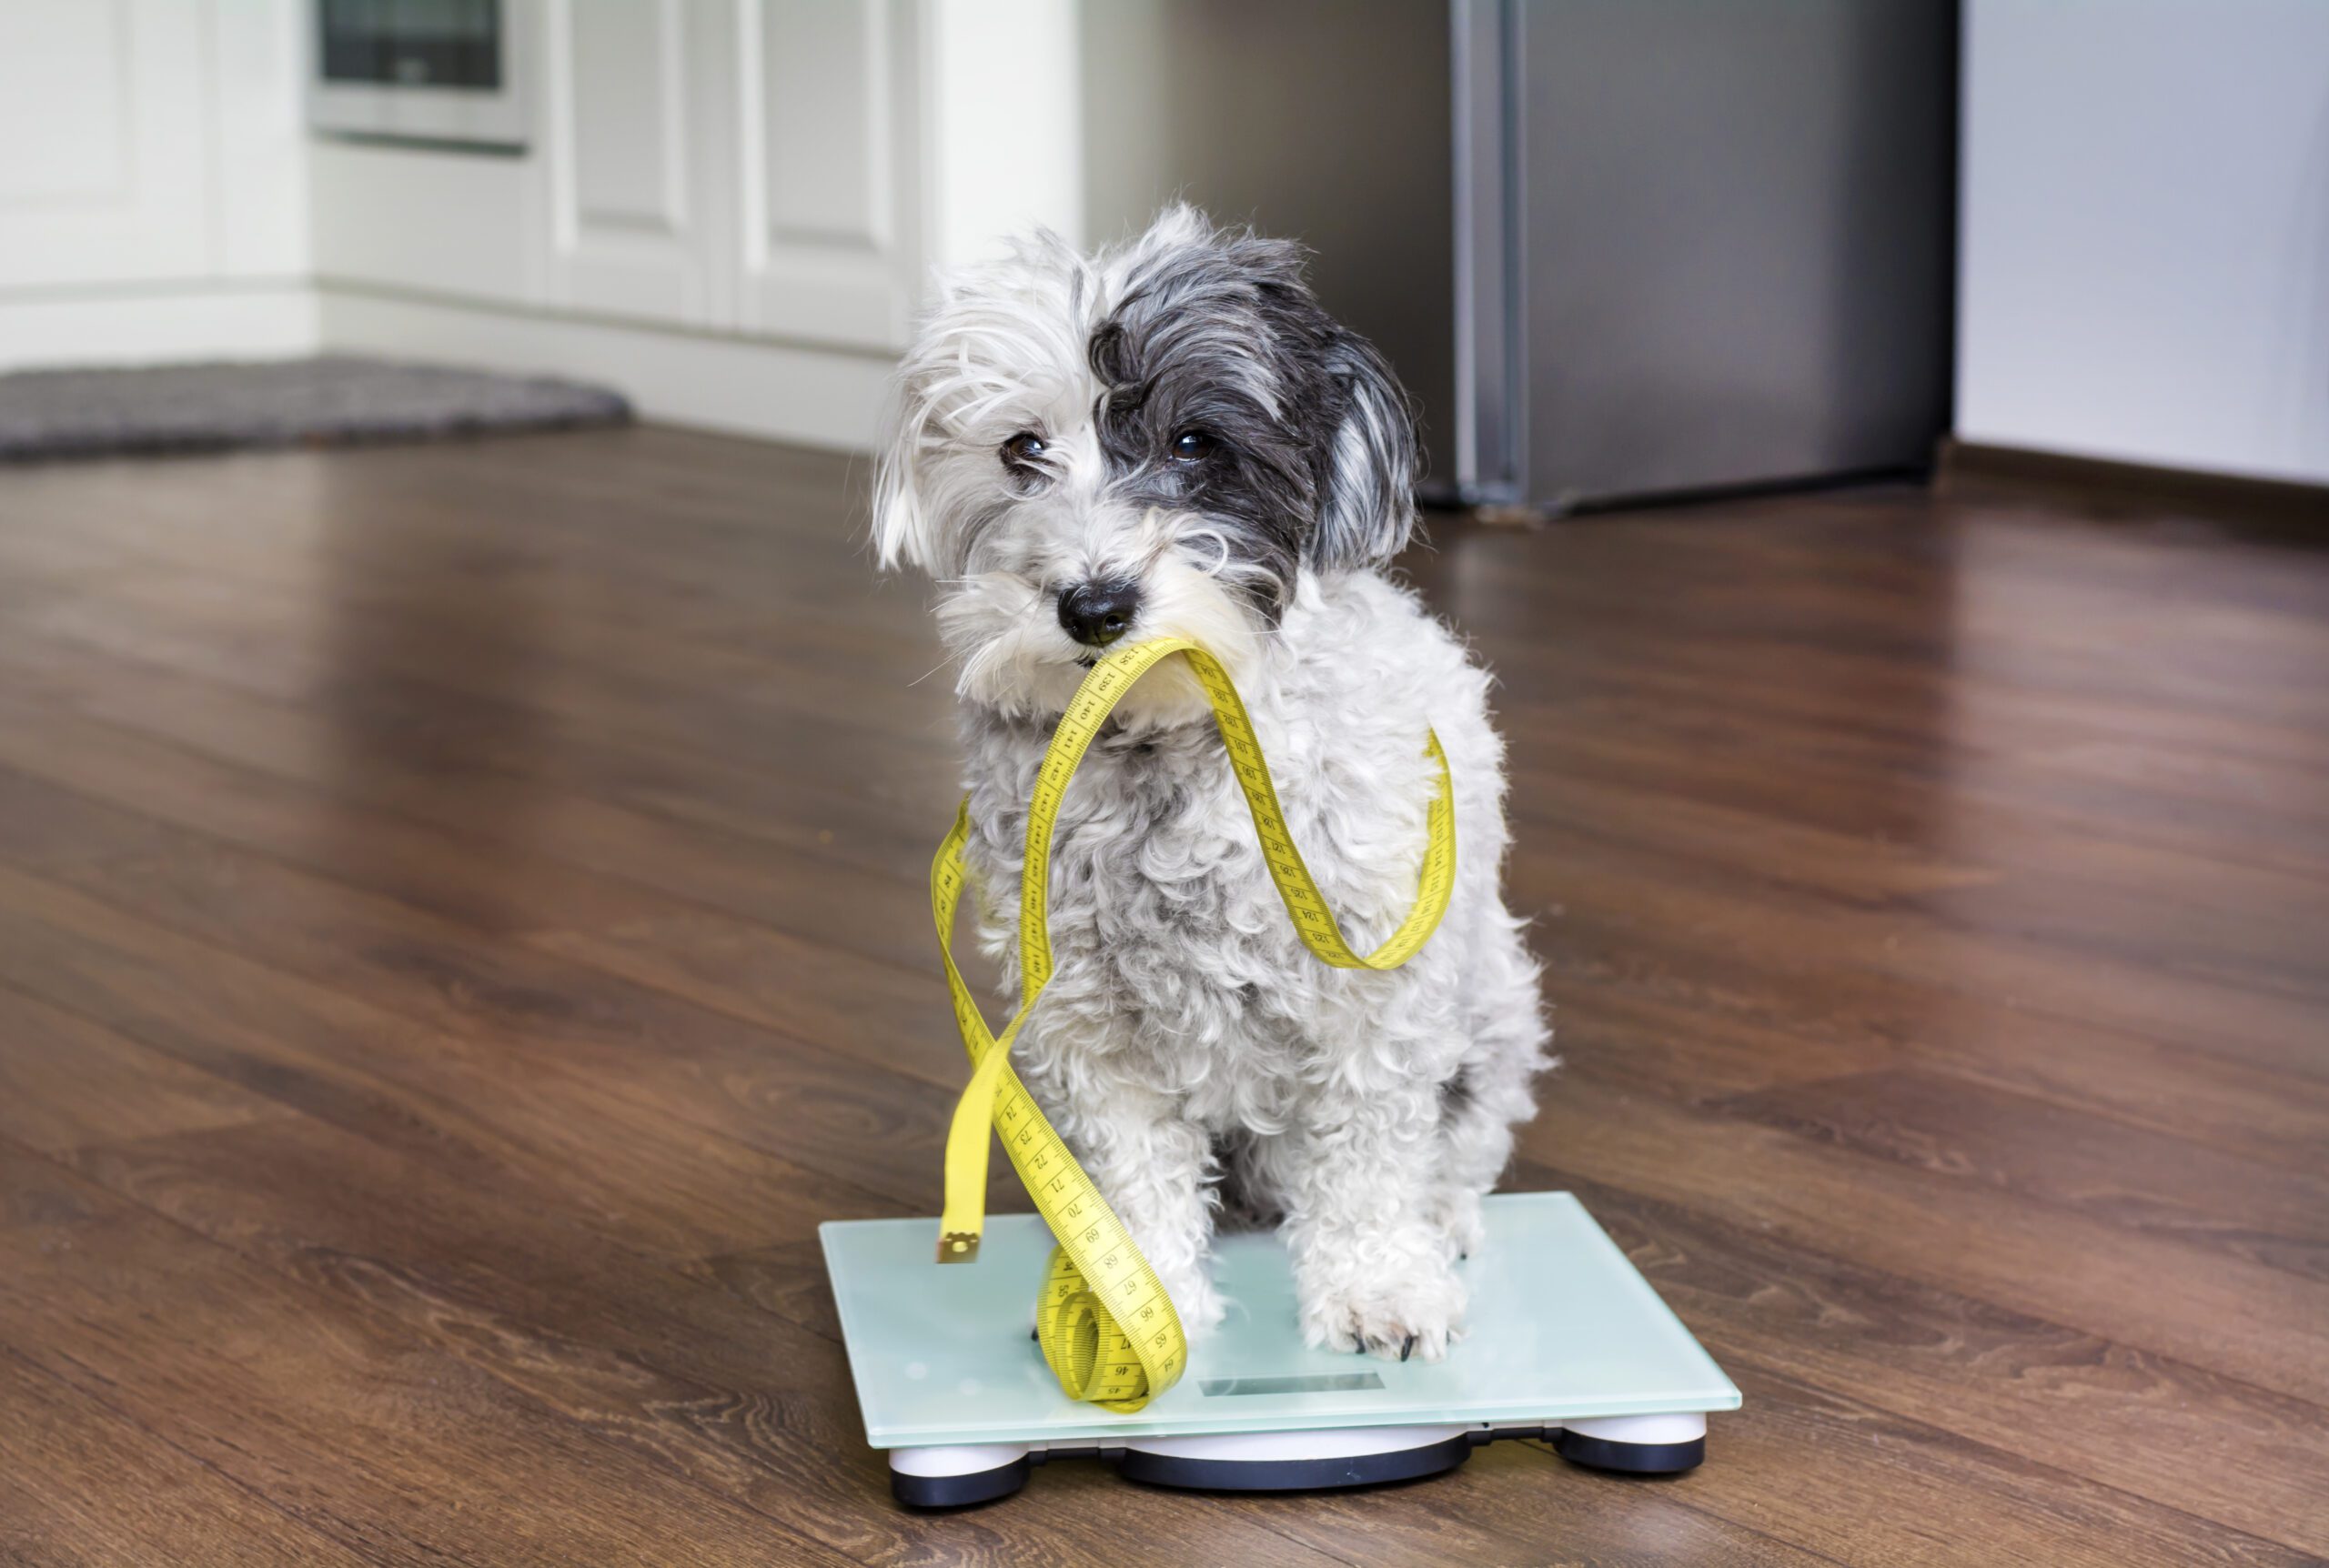 Small Puppy Measure Scale Weight